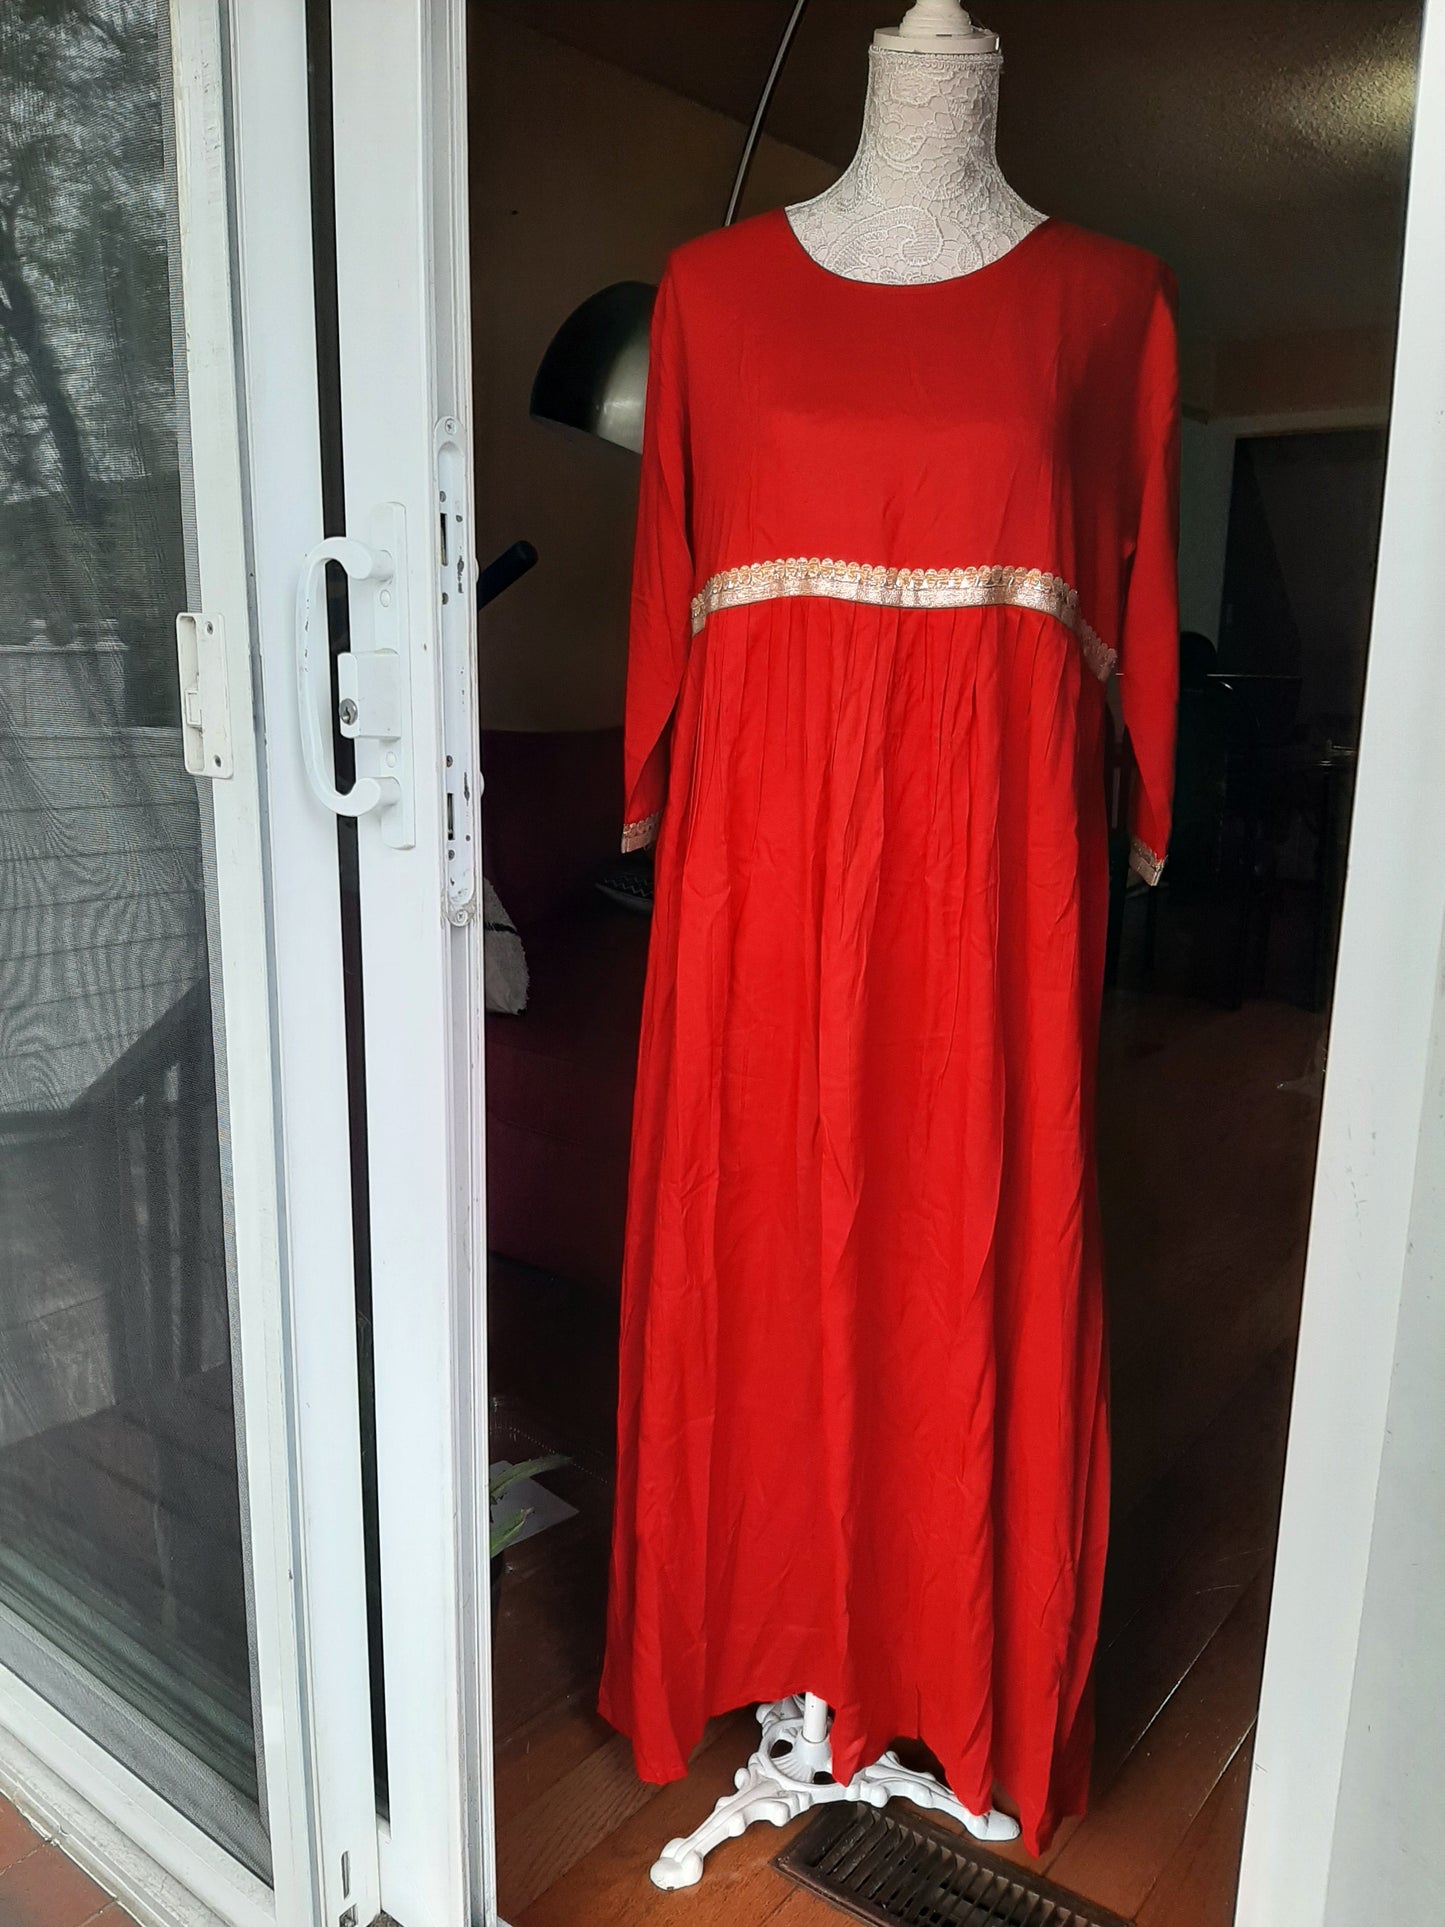 Plain Red Long Gown with Dupatta @ DressingStylesCA.com